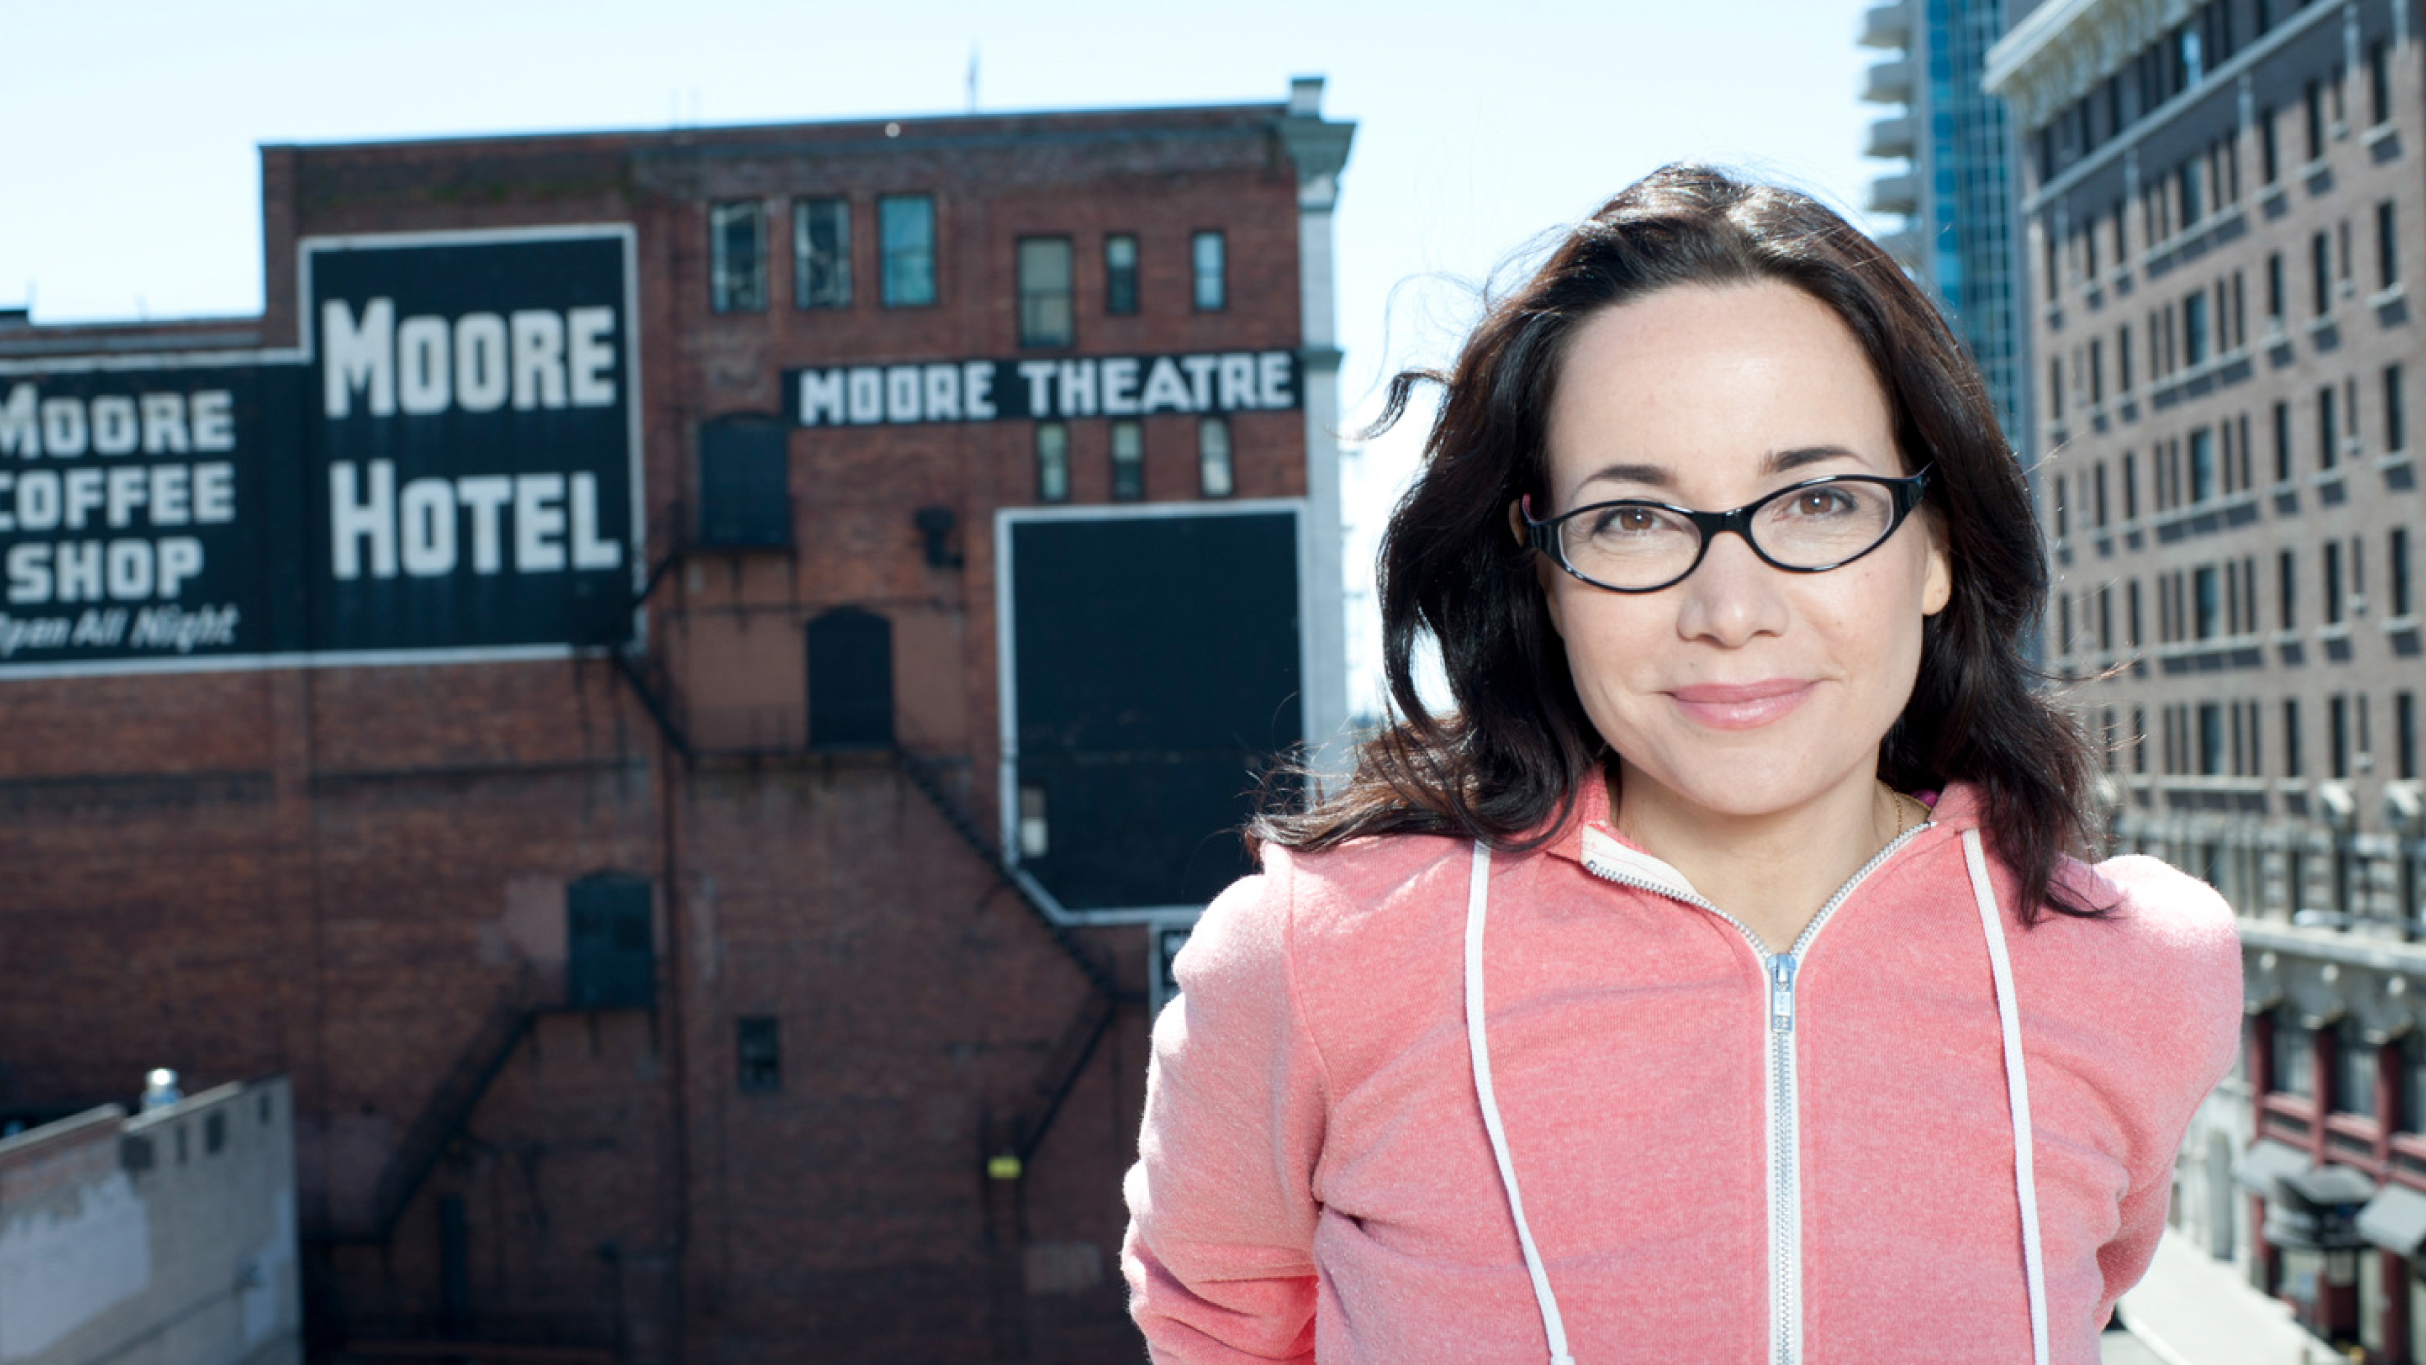 Janeane Garofalo, featuring Nyc's Best Comedians!